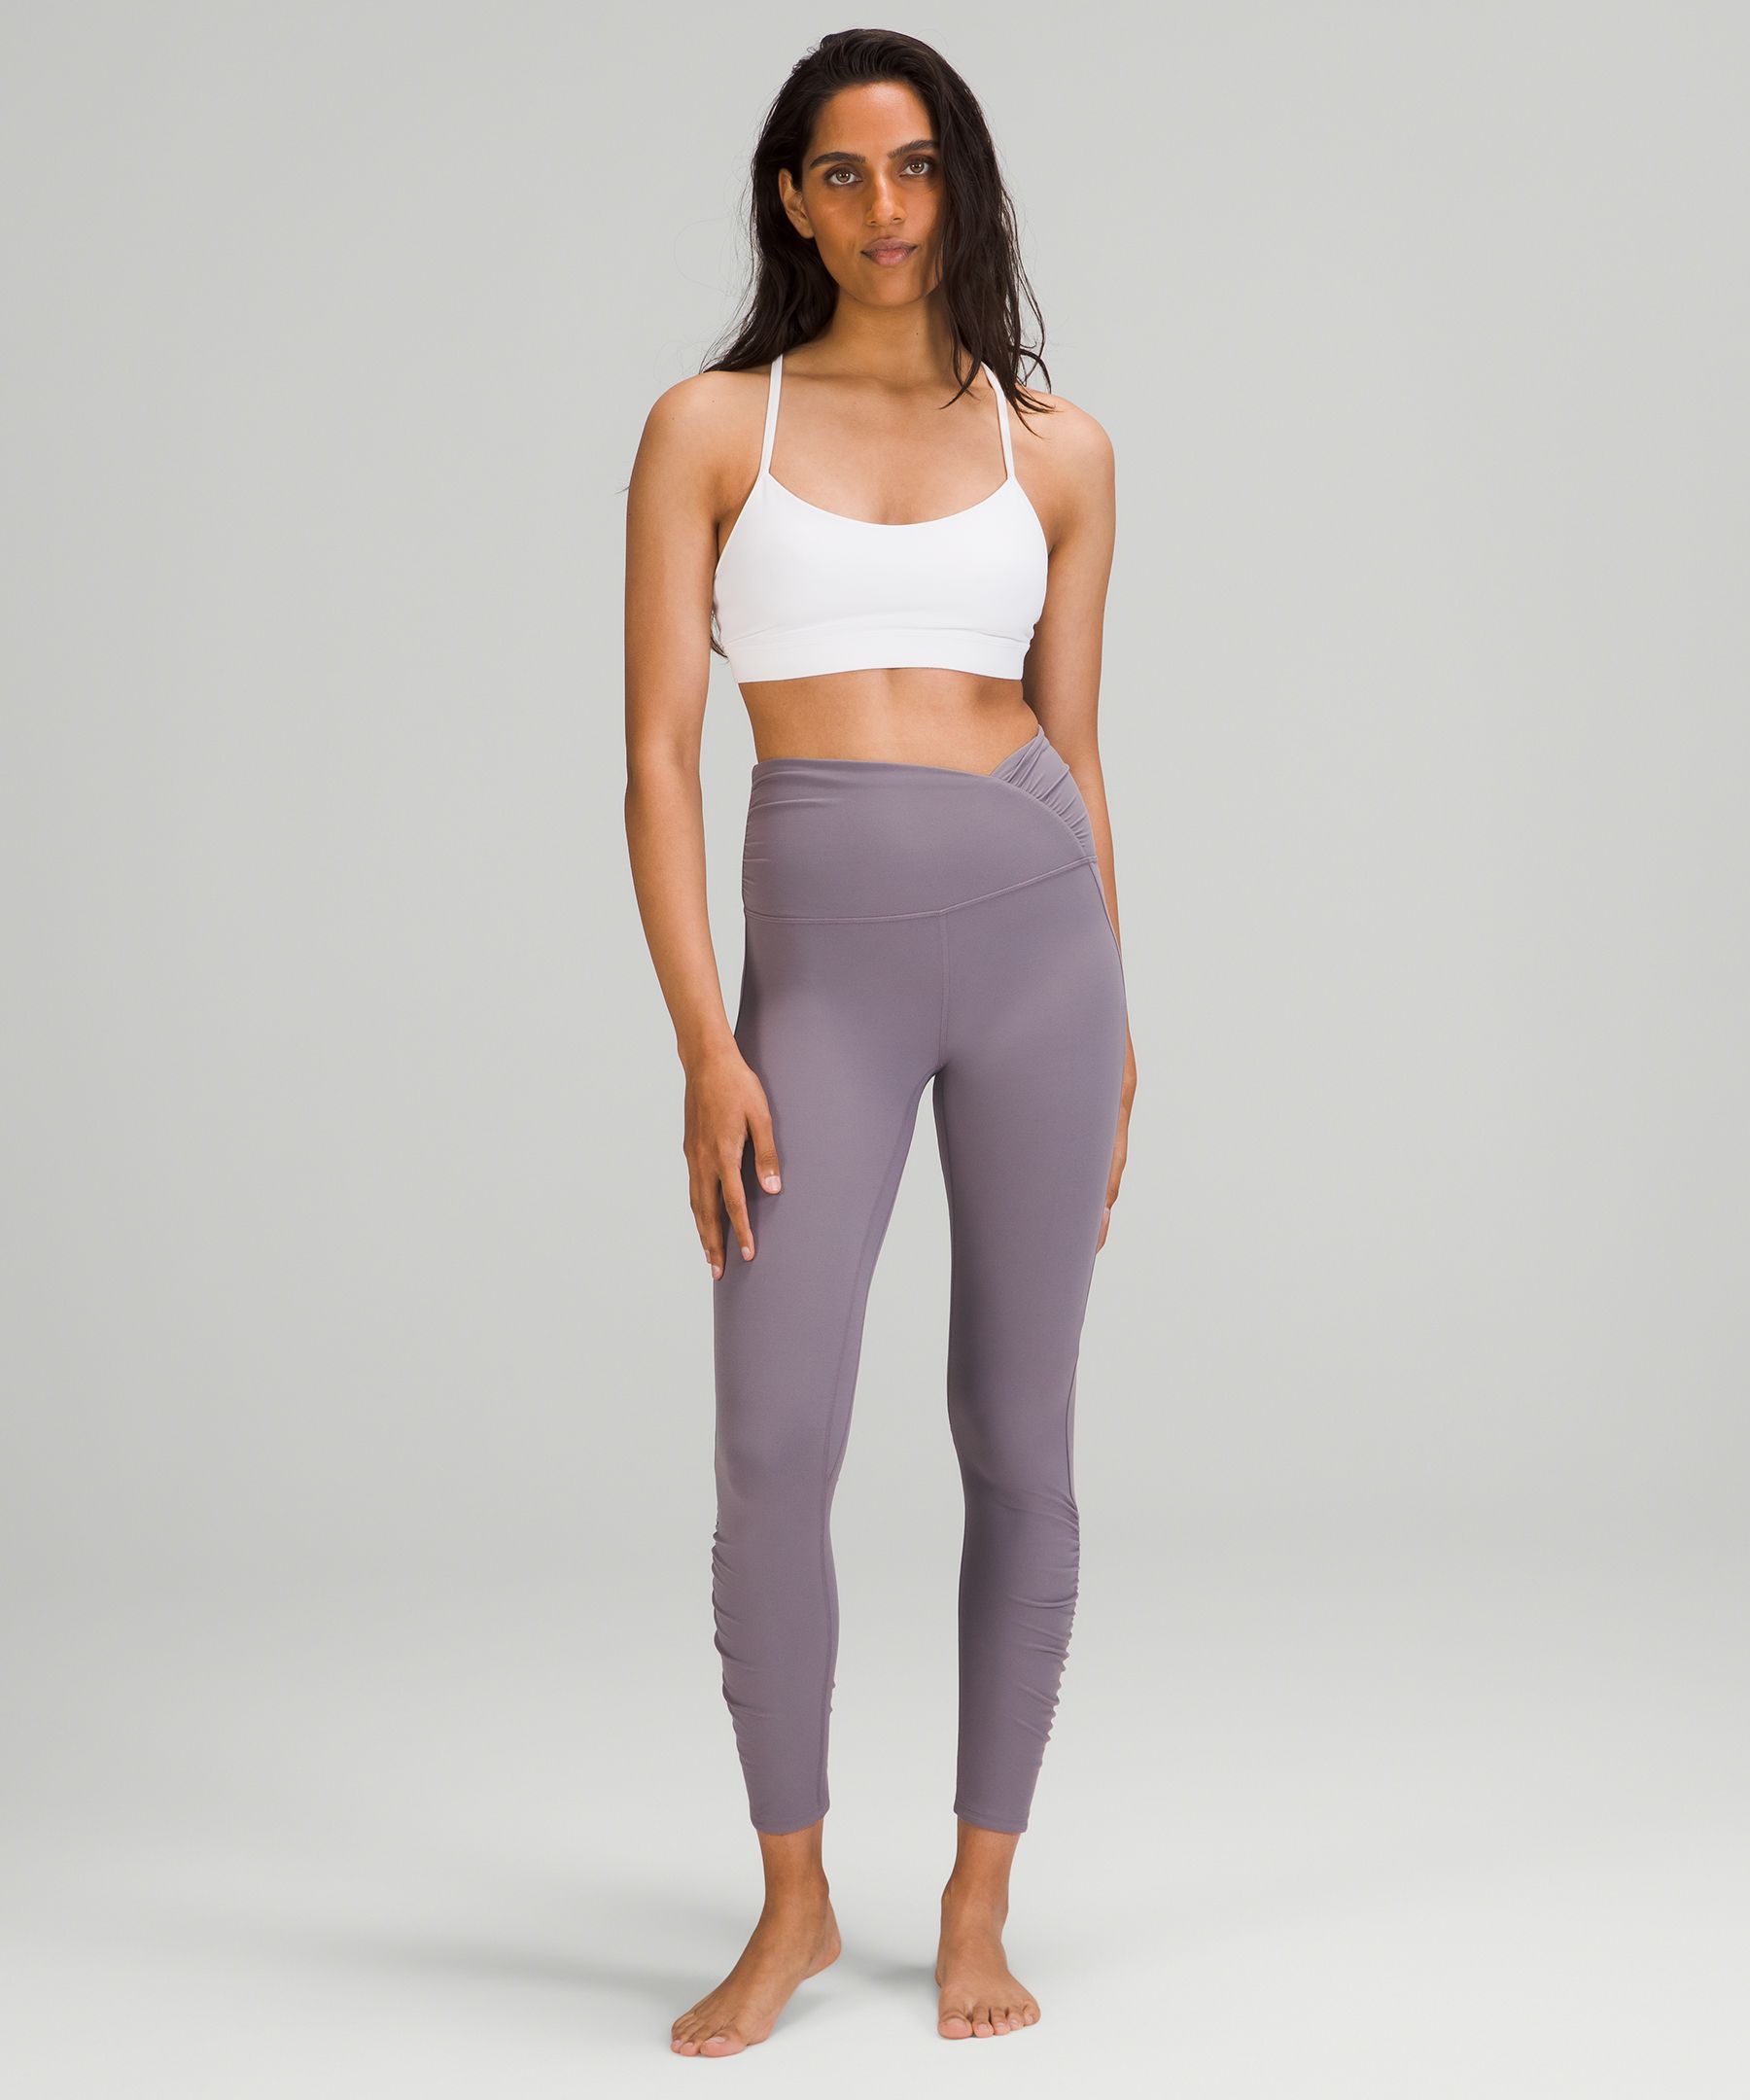 Lululemon Align High-rise Ruched Waist Pant 25th